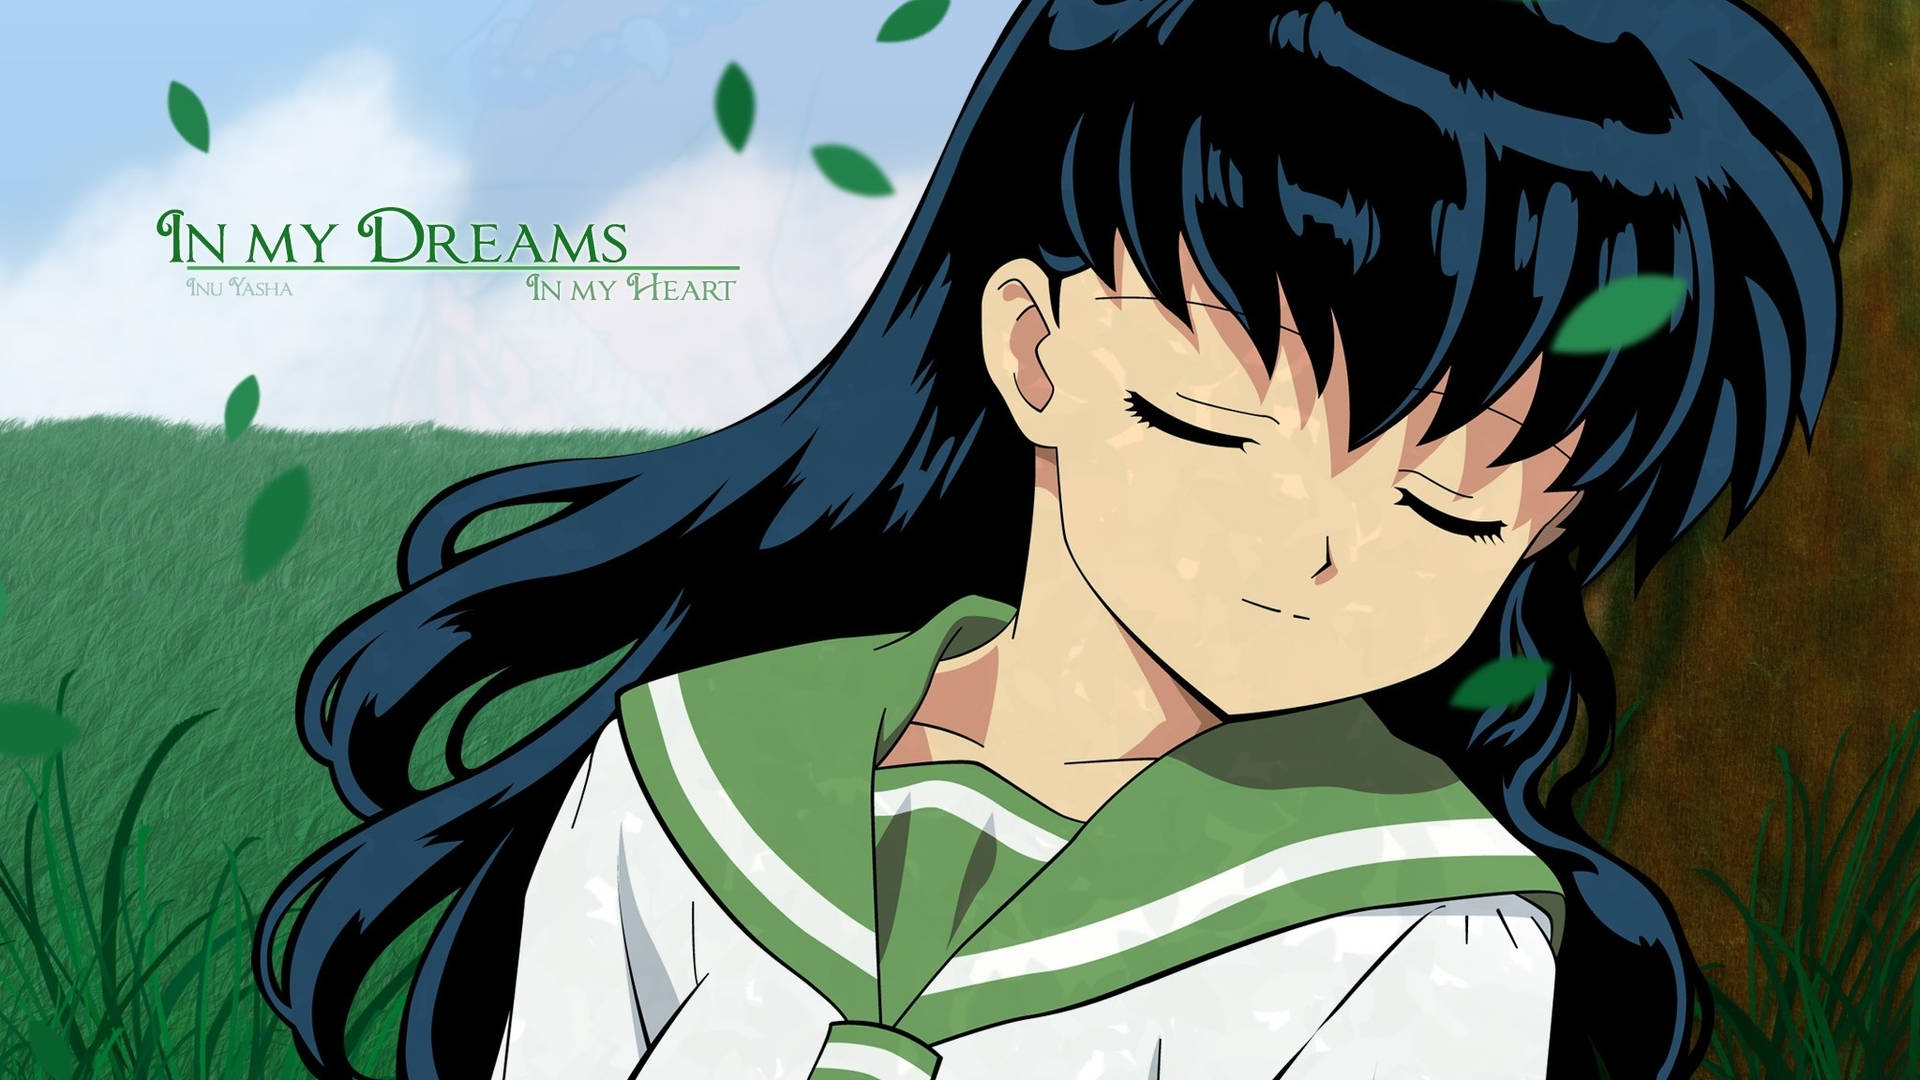 Top 999+ Kagome Wallpaper Full HD, 4K✅Free to Use